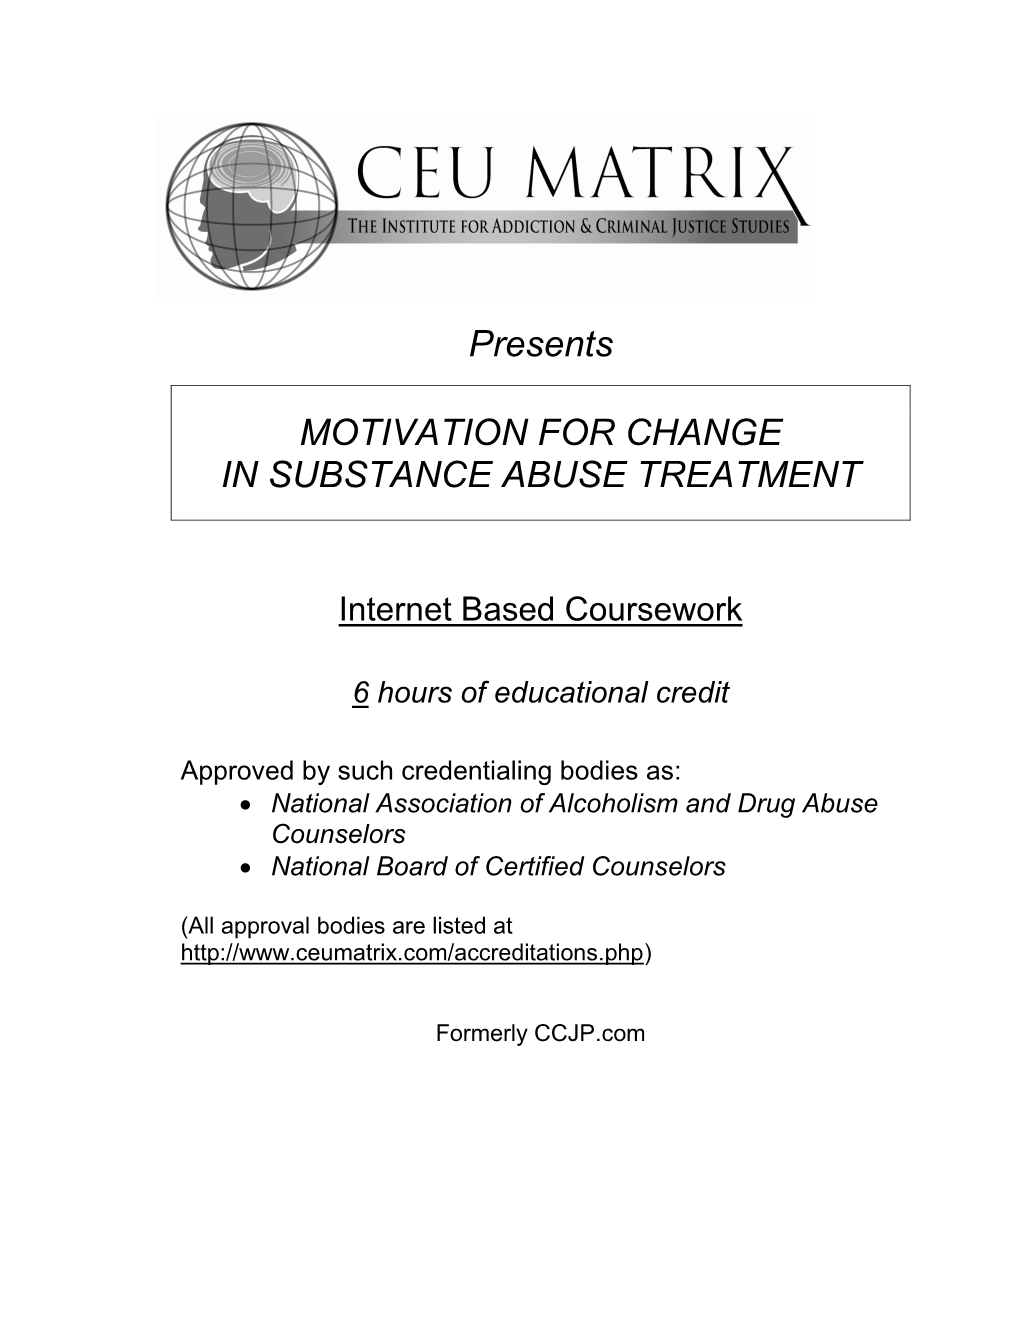 Presents MOTIVATION for CHANGE in SUBSTANCE ABUSE